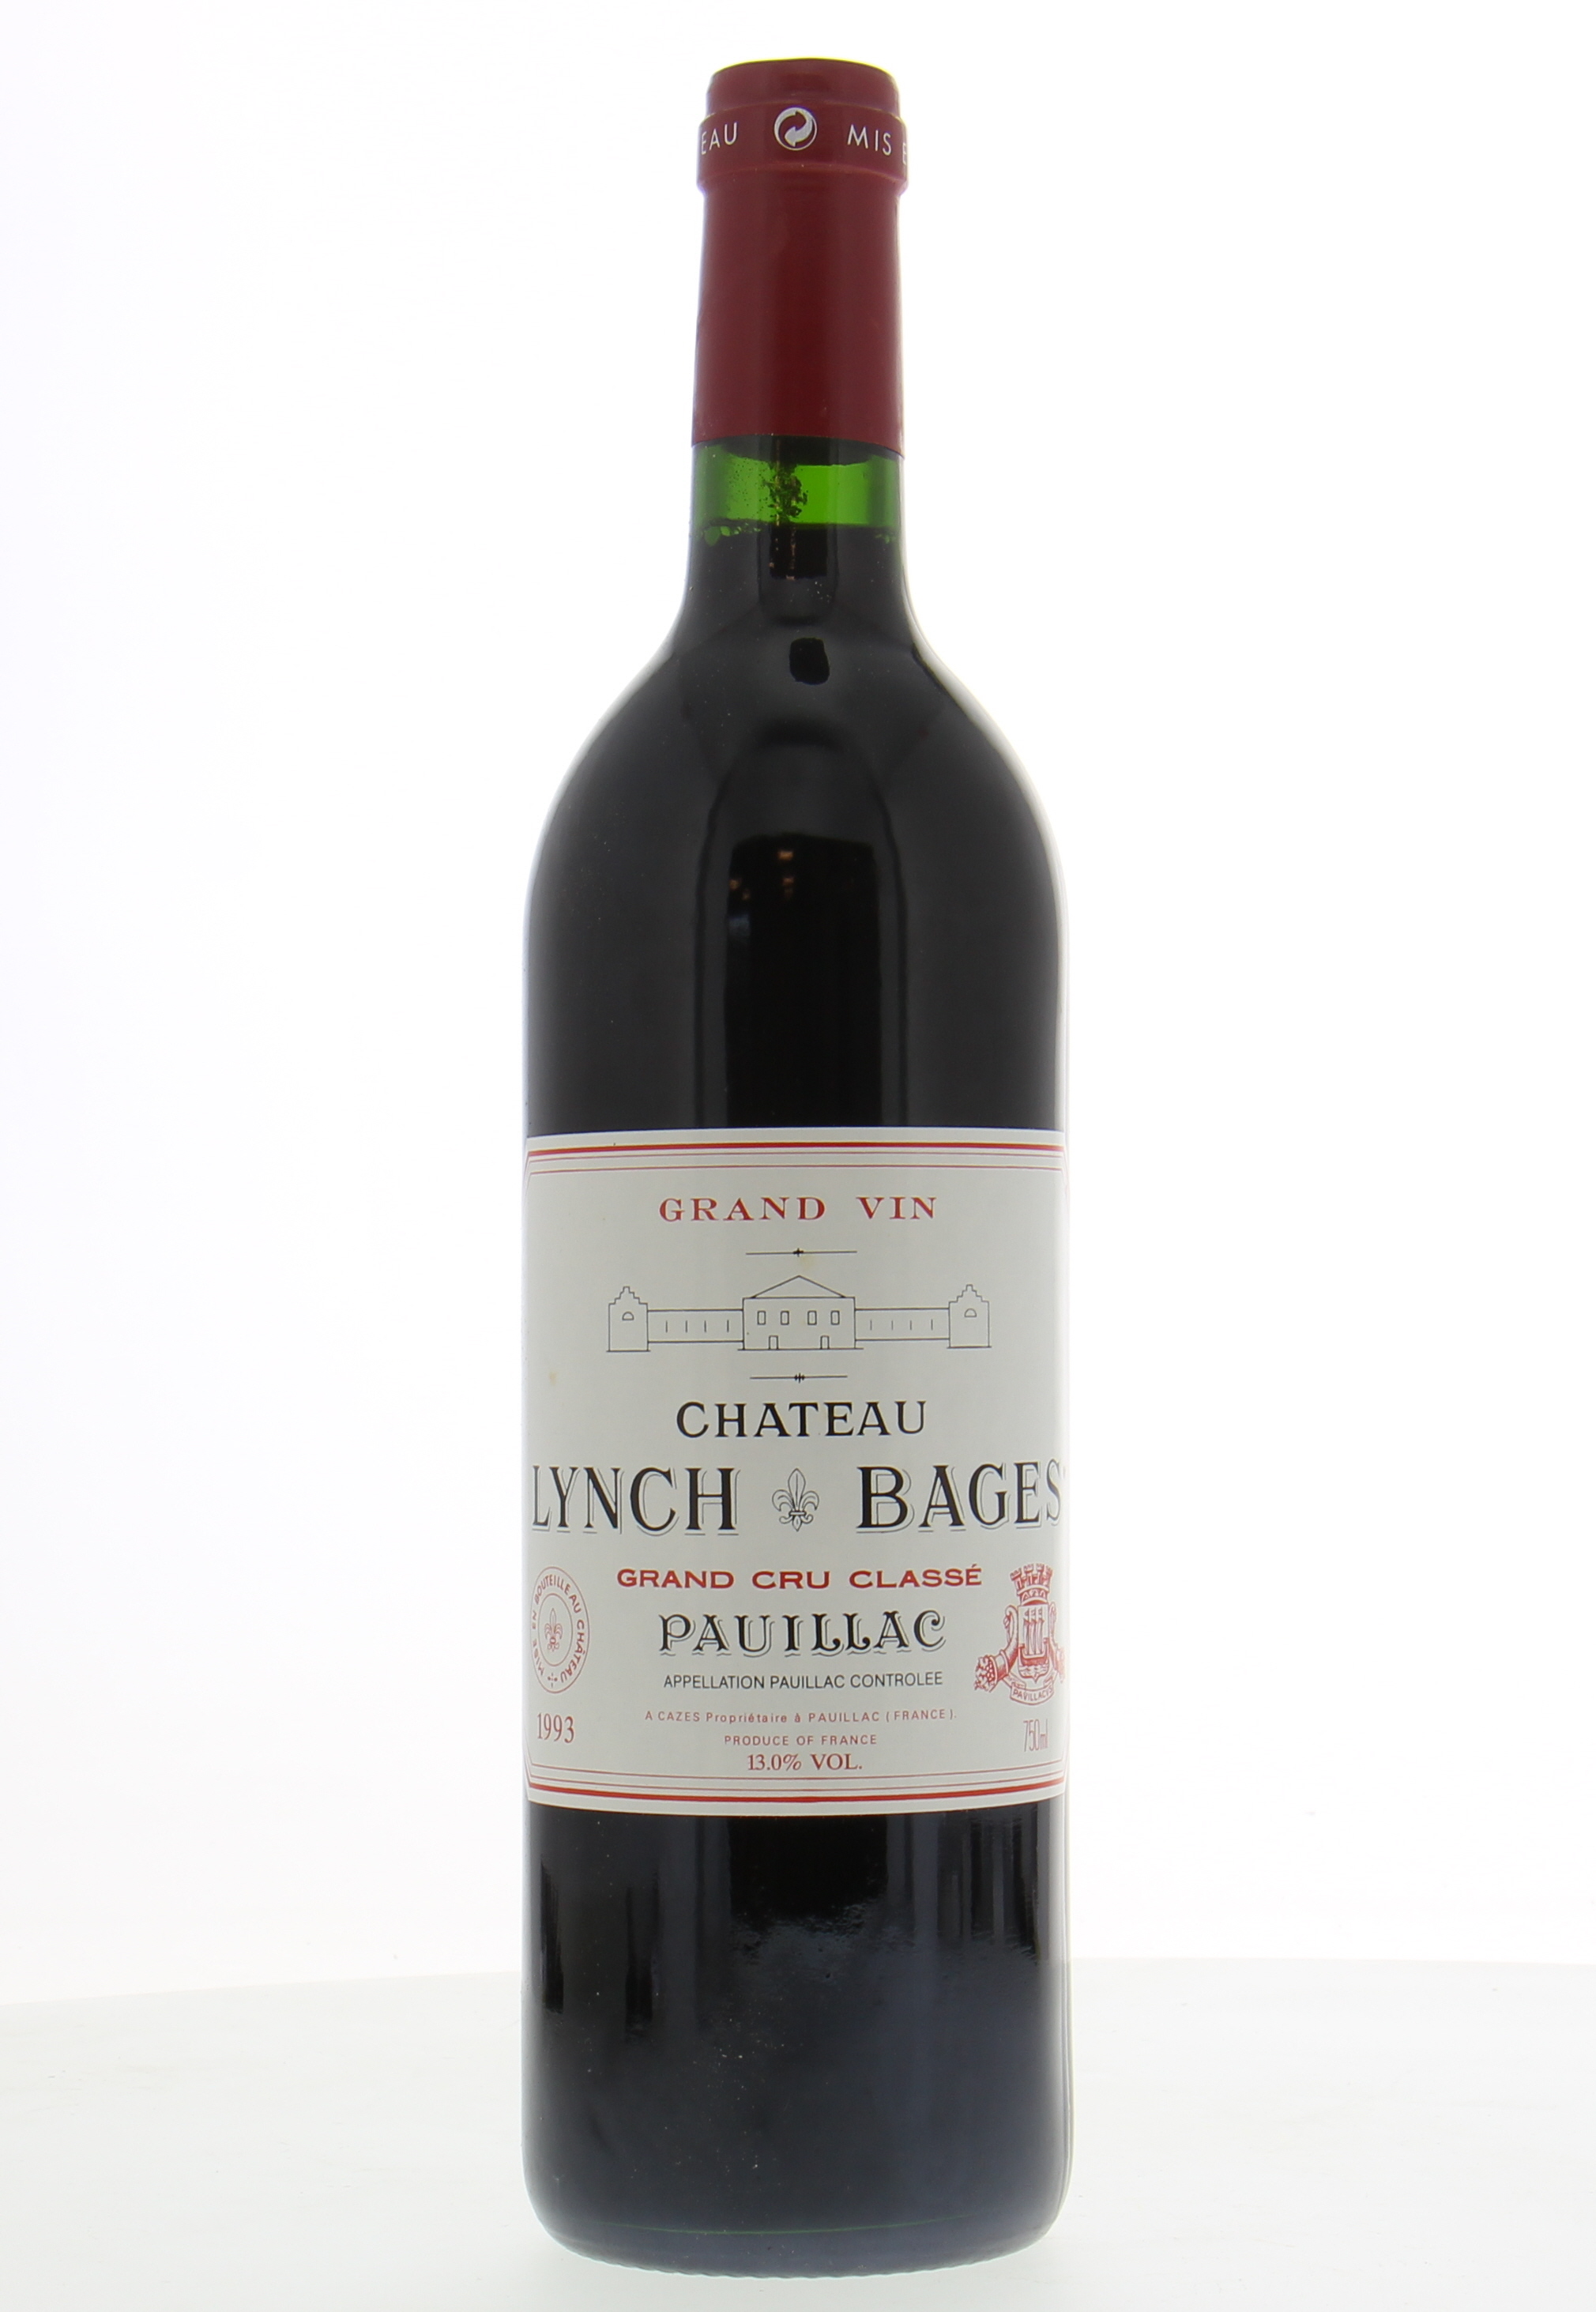 Chateau Lynch Bages - Chateau Lynch Bages 1993 Perfect